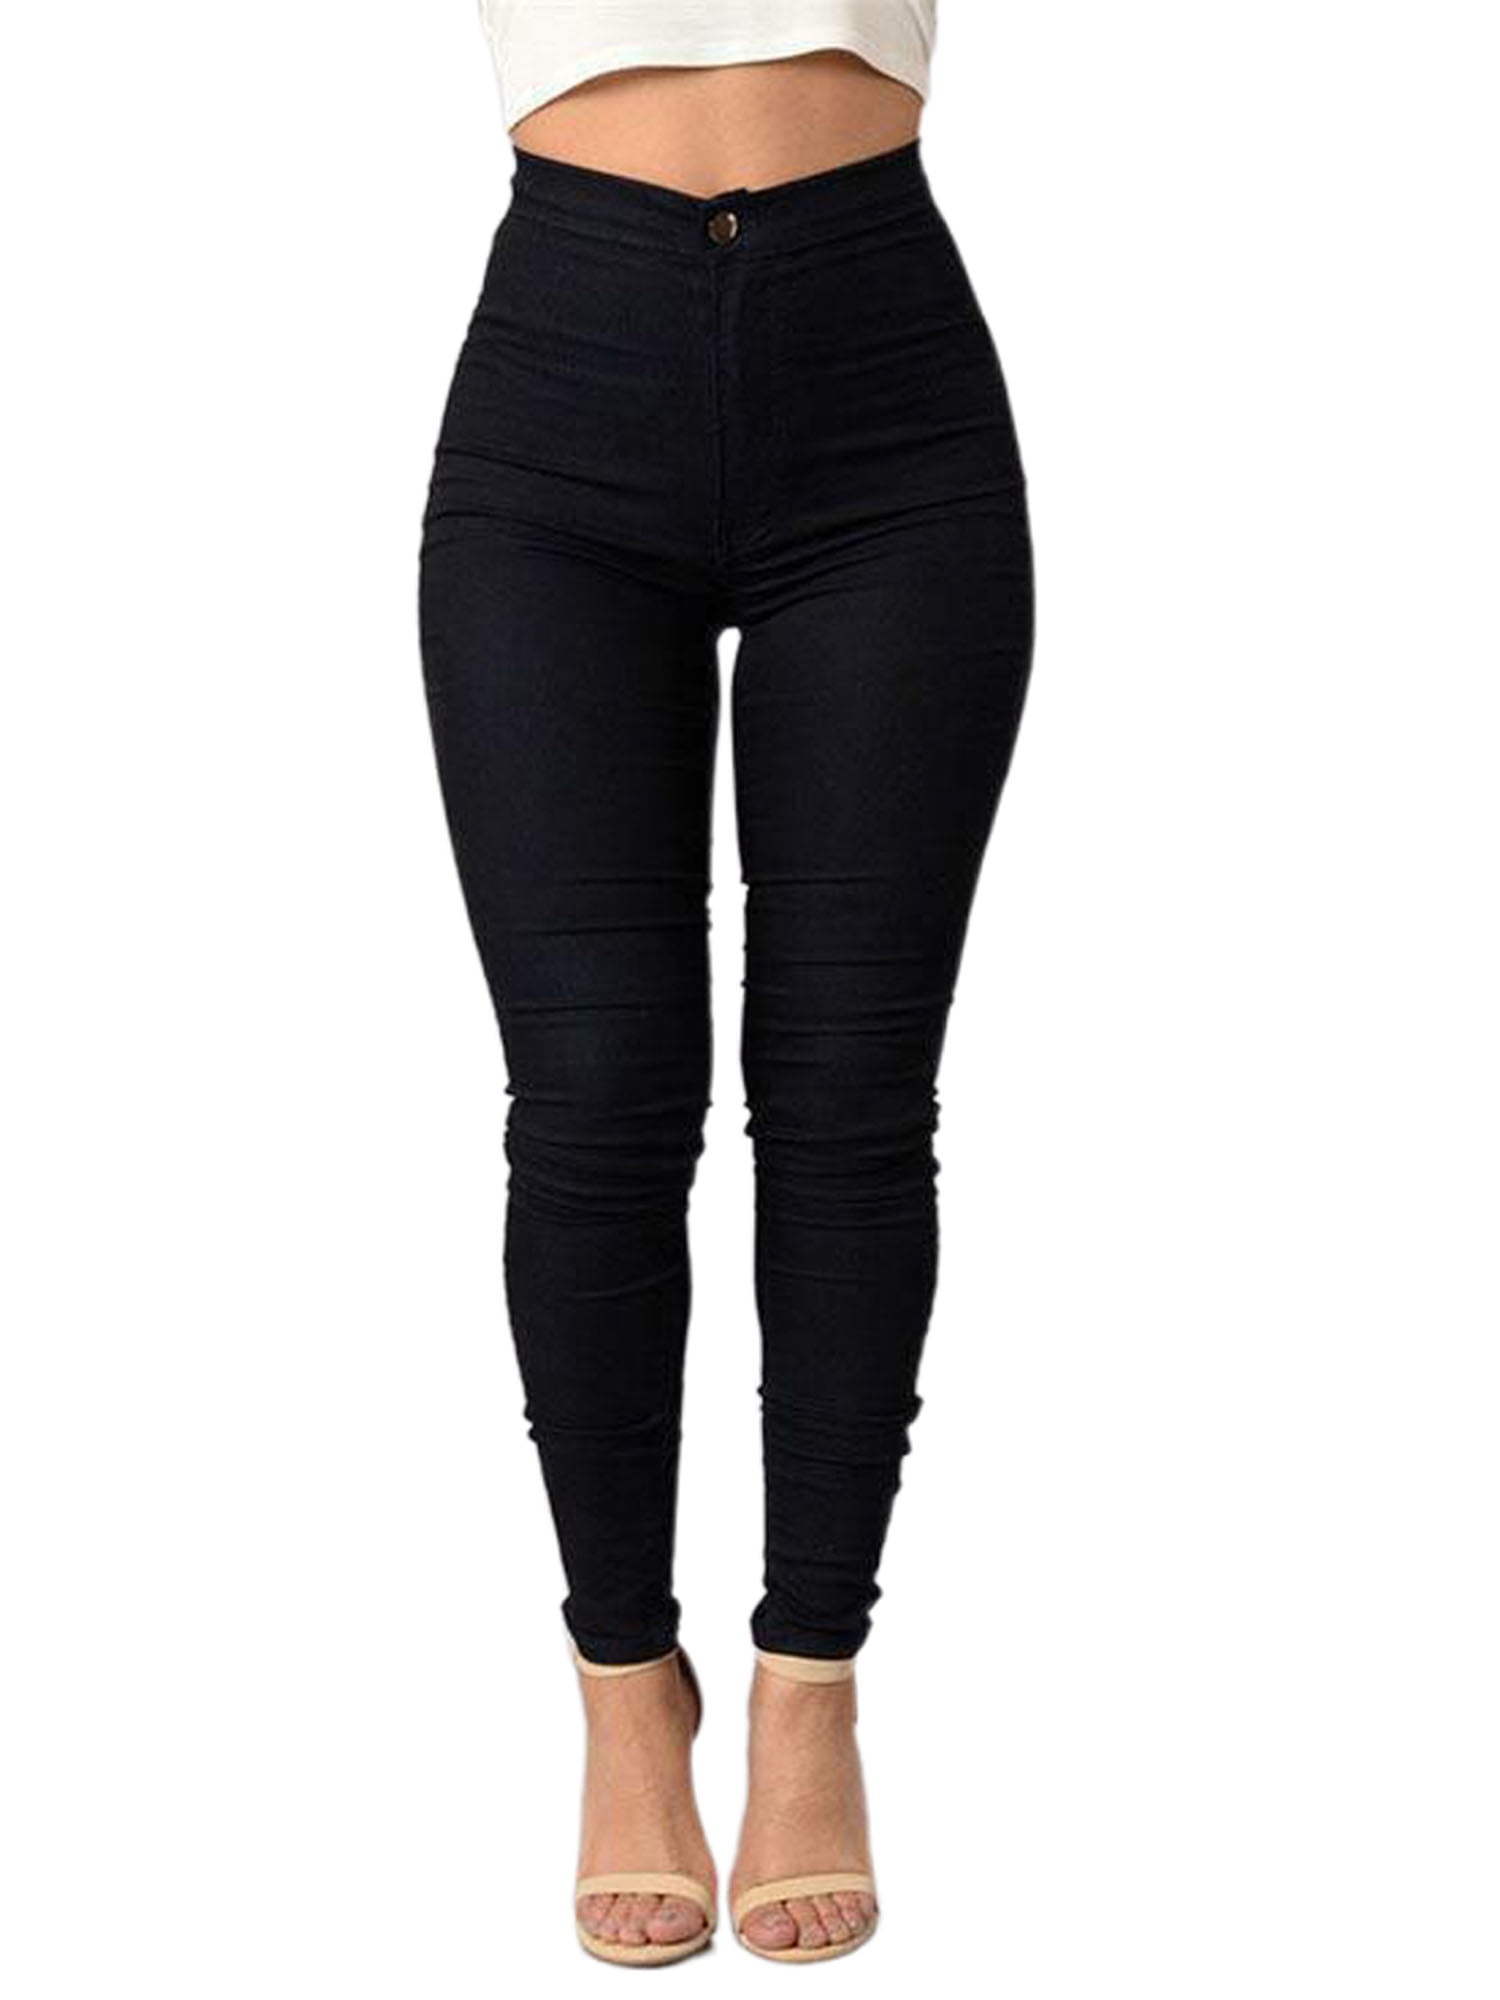 Skinny with Pockets Casual Business Pants Stretch Women\'s Dress Jeggings YiLvUst Pants